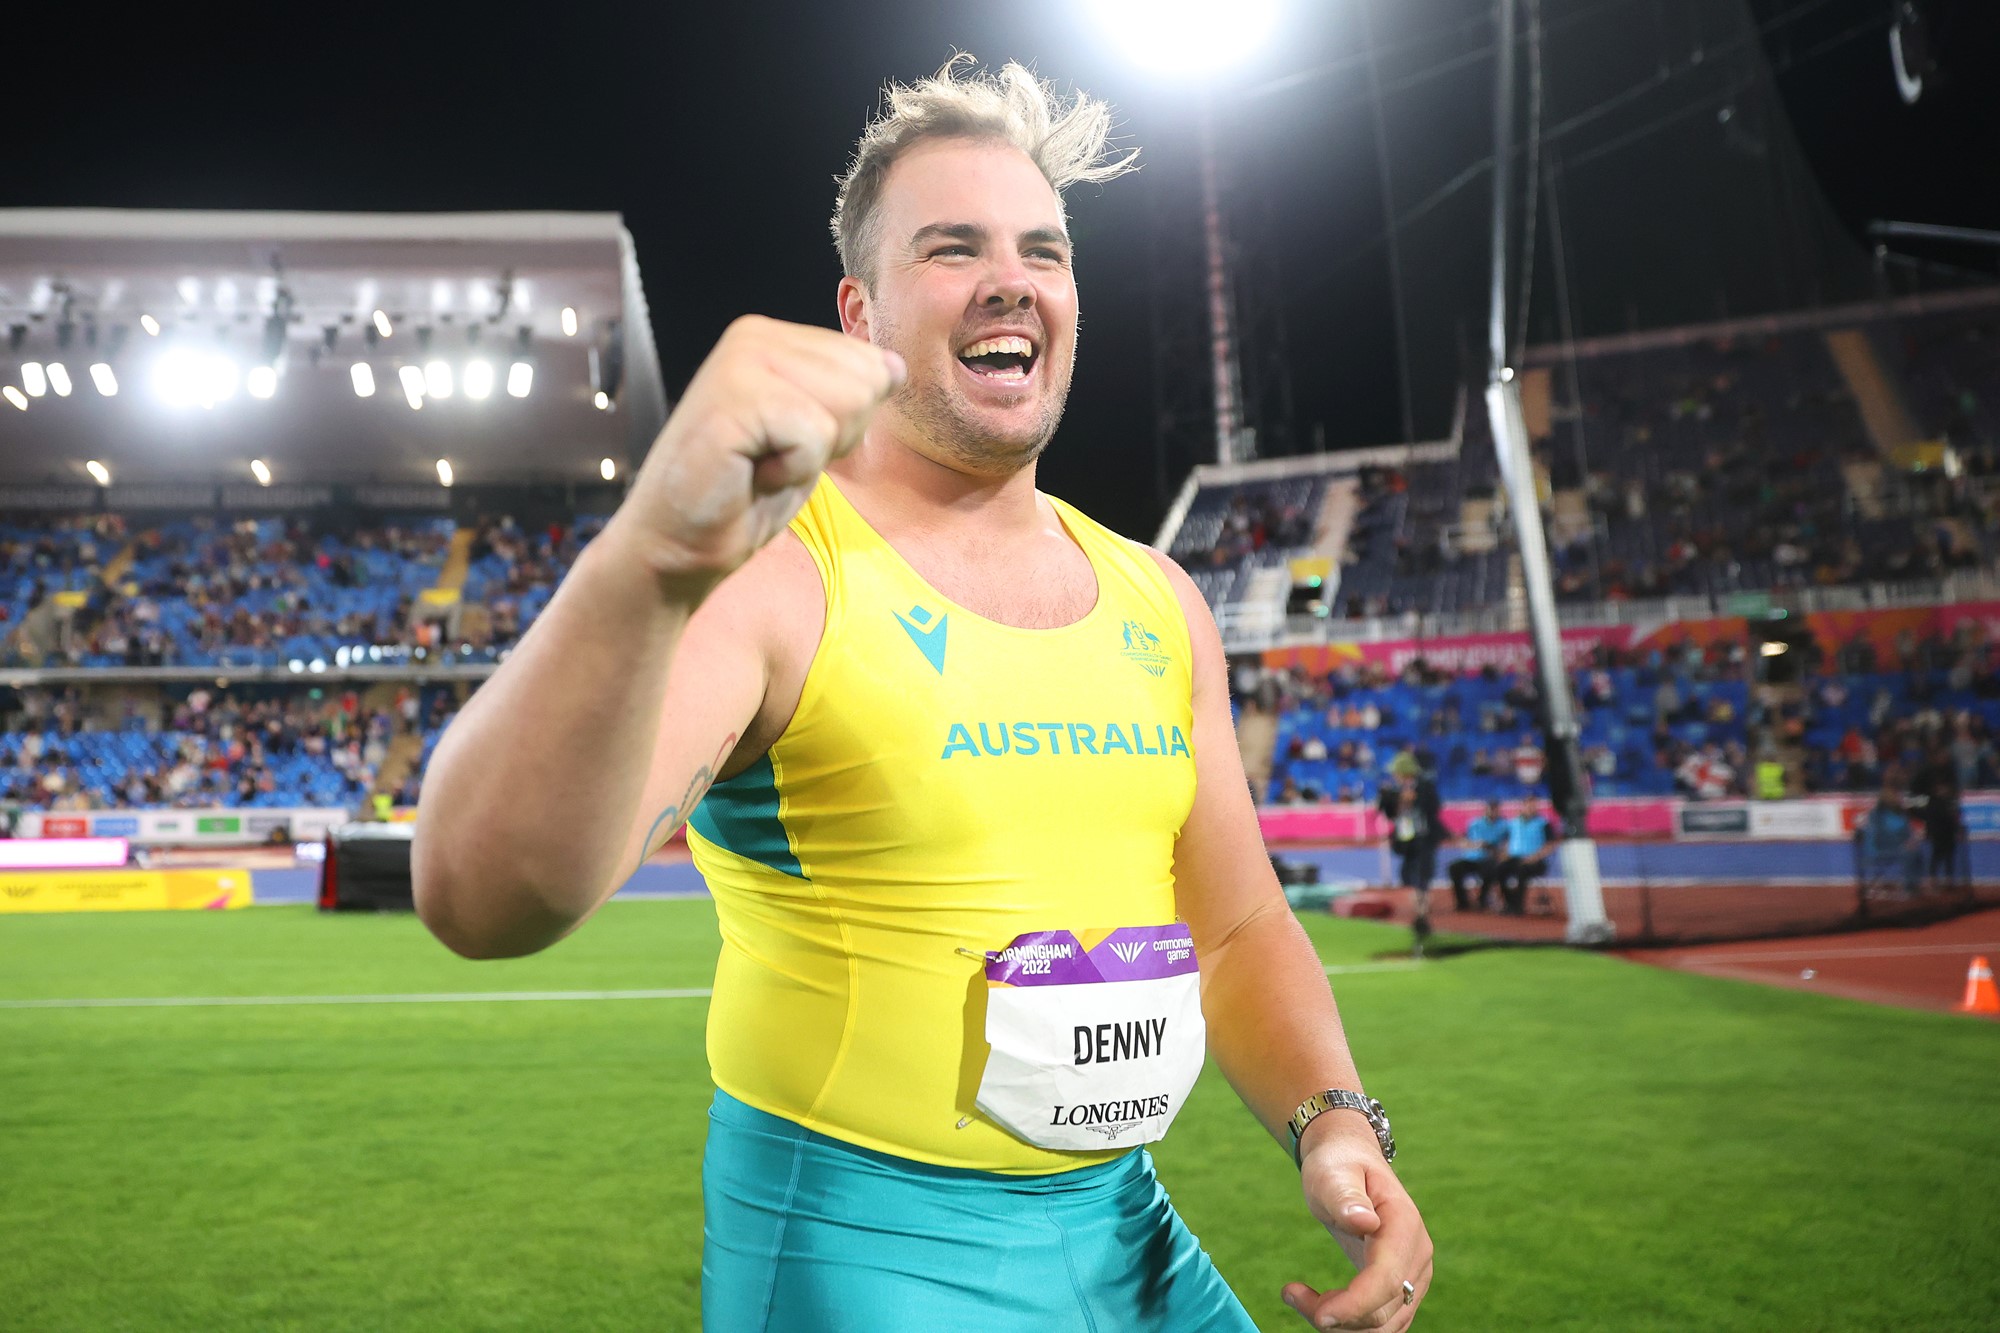 Matthew Denny clenches a fist after winning Commonwealth Games gold in the discus.